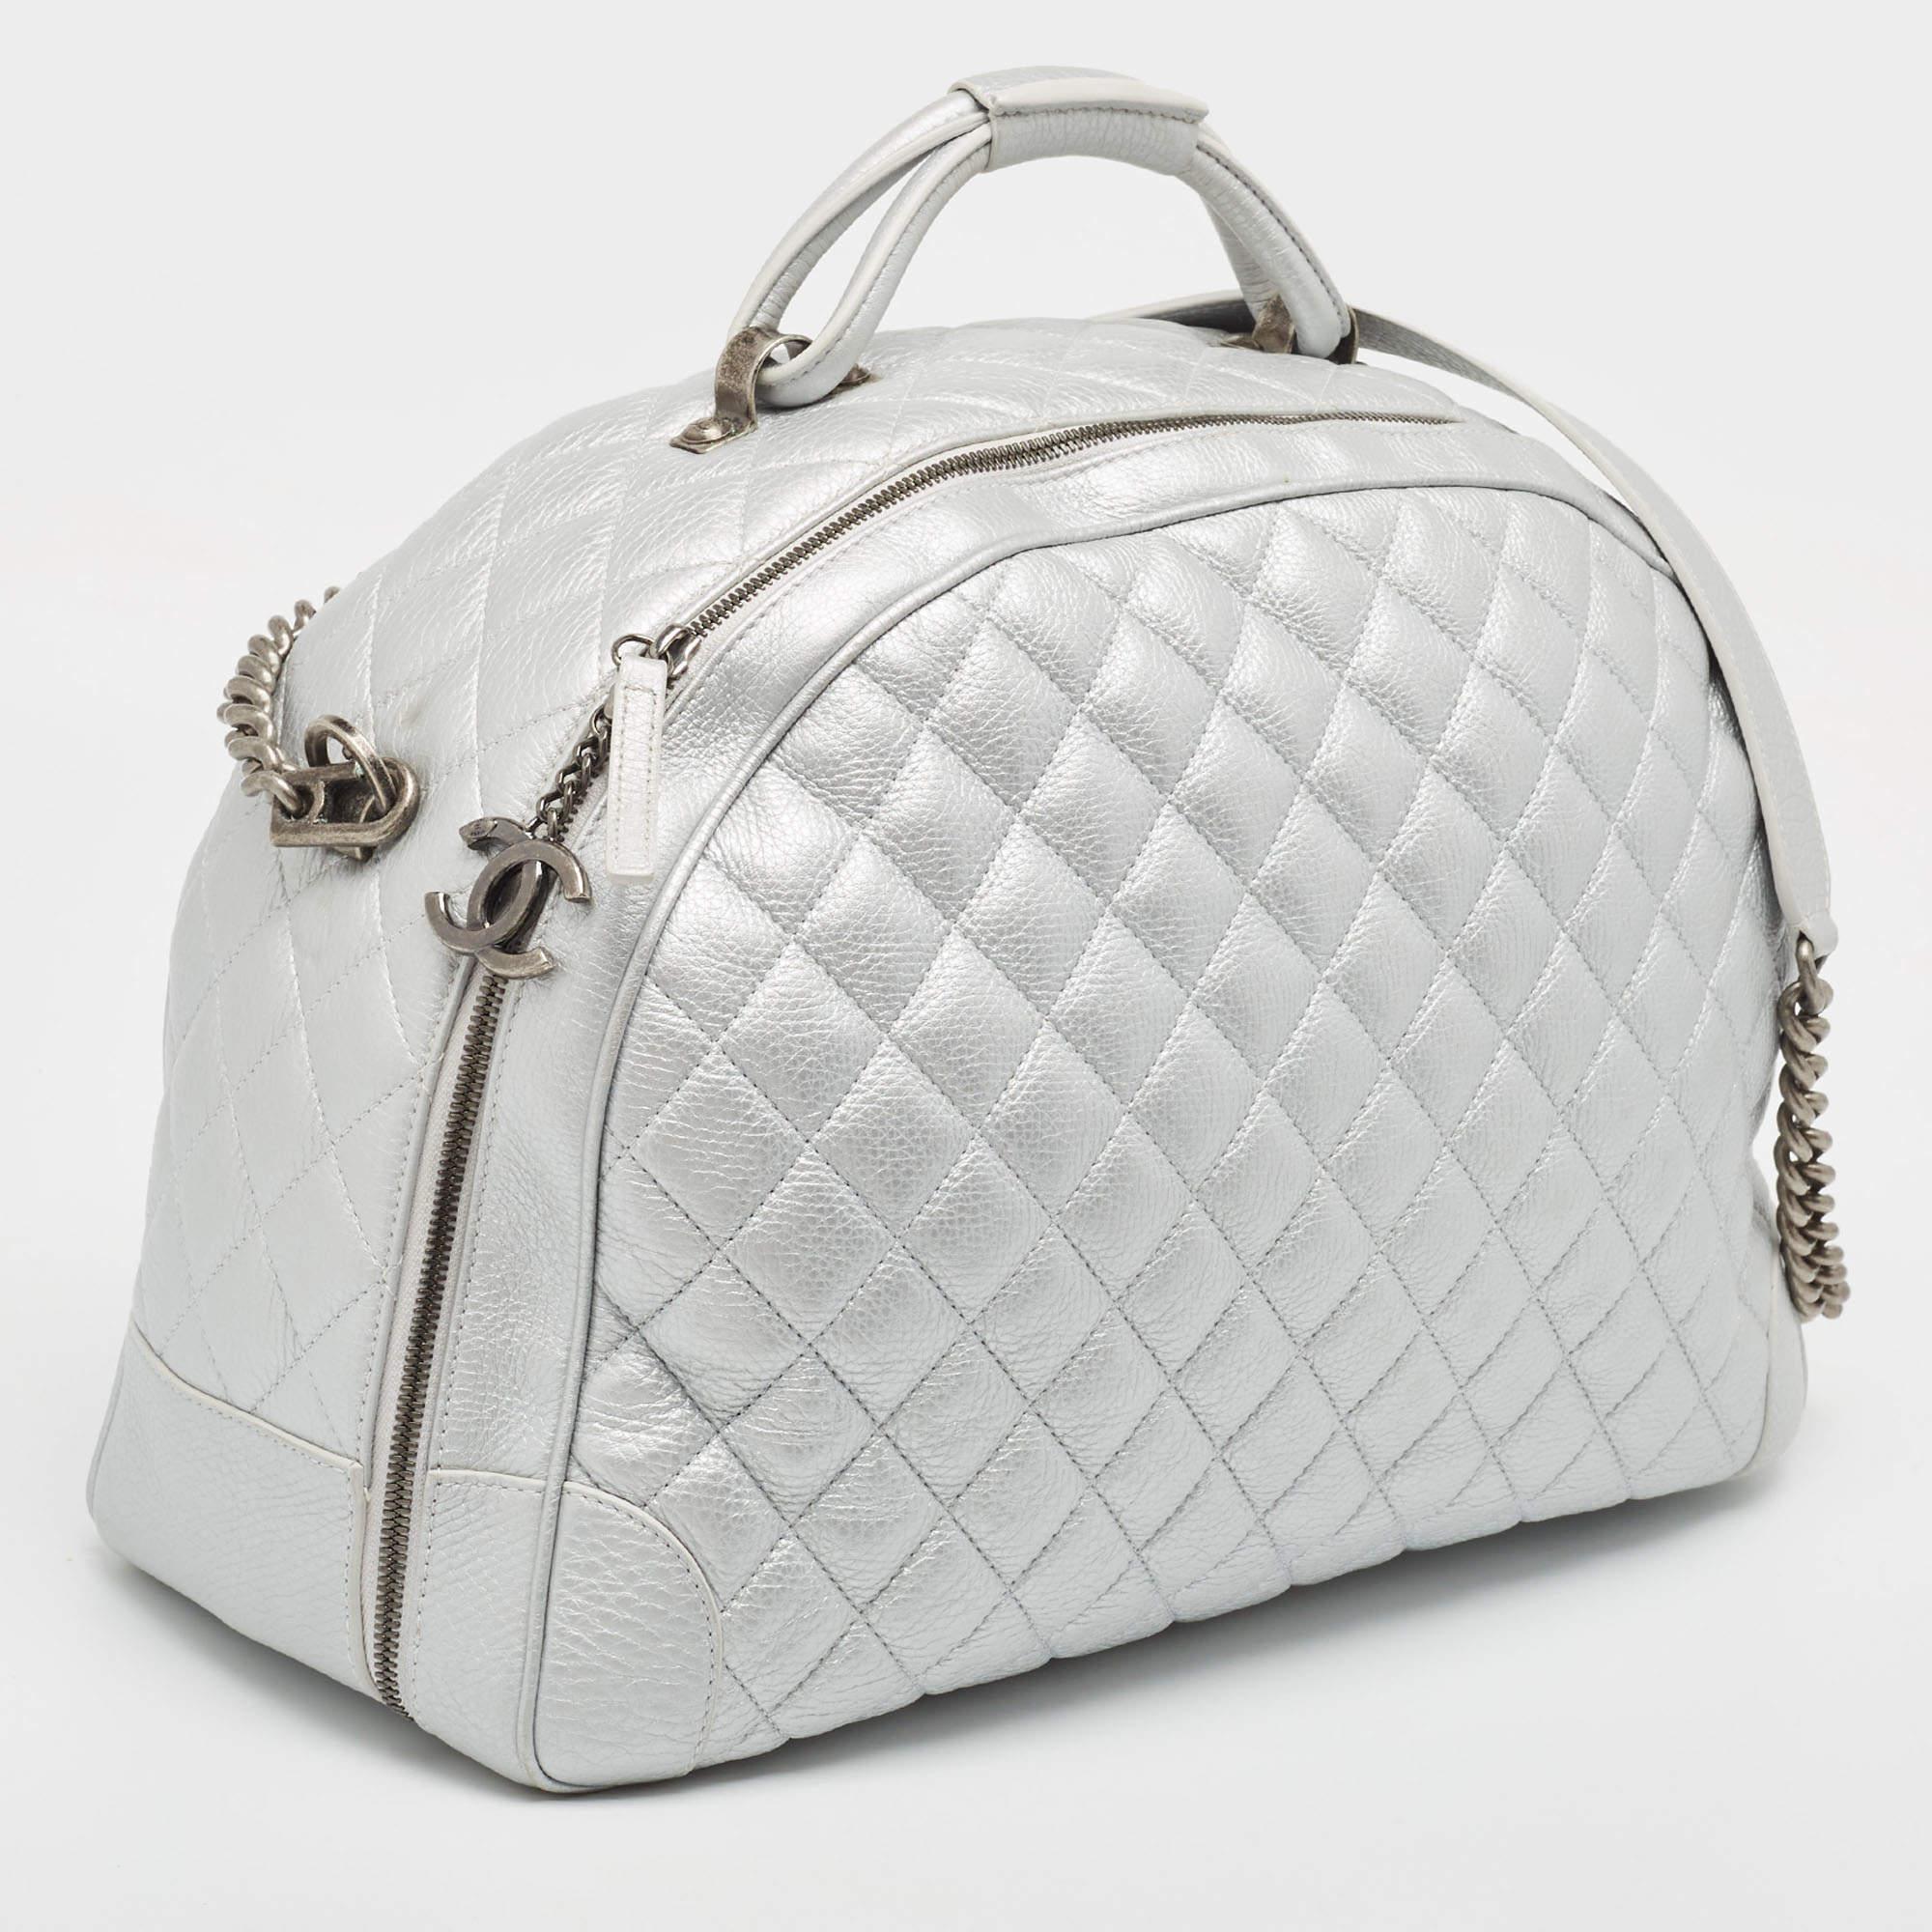 Women's Chanel Metallic Grey Quilted Leather Airlines Round Trip Bowler Bag